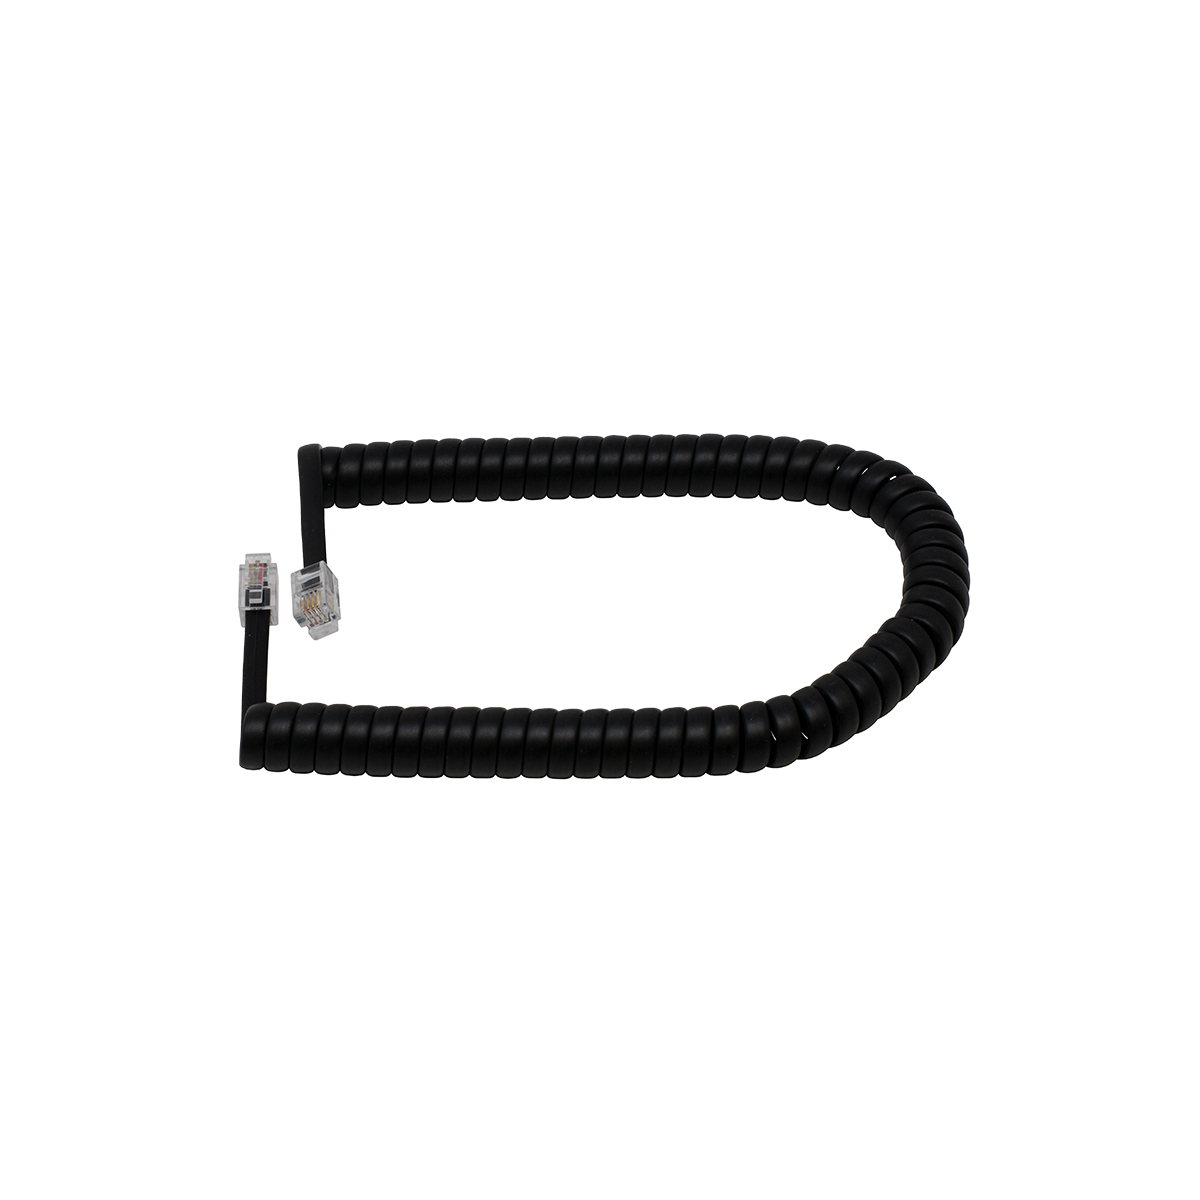 6' Flat Black Coiled Handset Cord